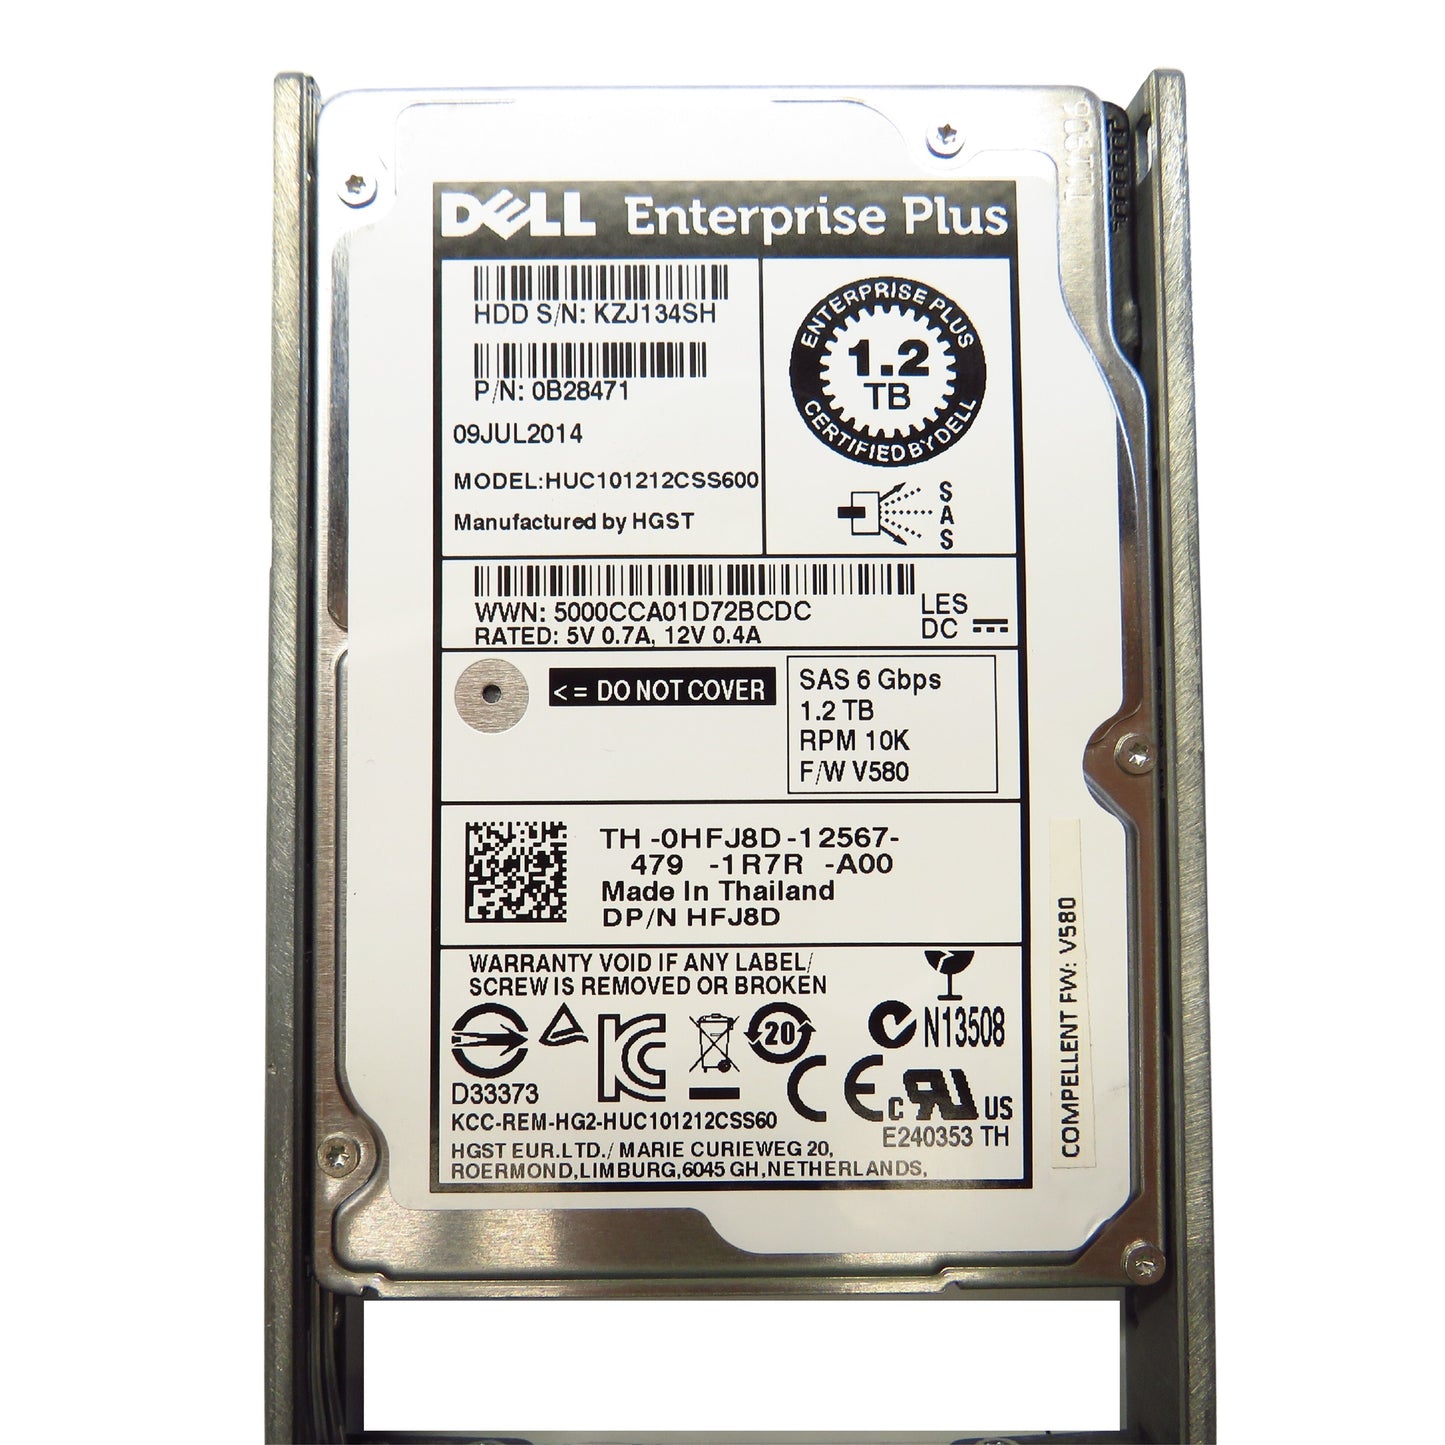 Dell Compellent 1.2TB 2.5" SAS 6Gbps 10K RPM HDD Hard Drive (Refurbished)